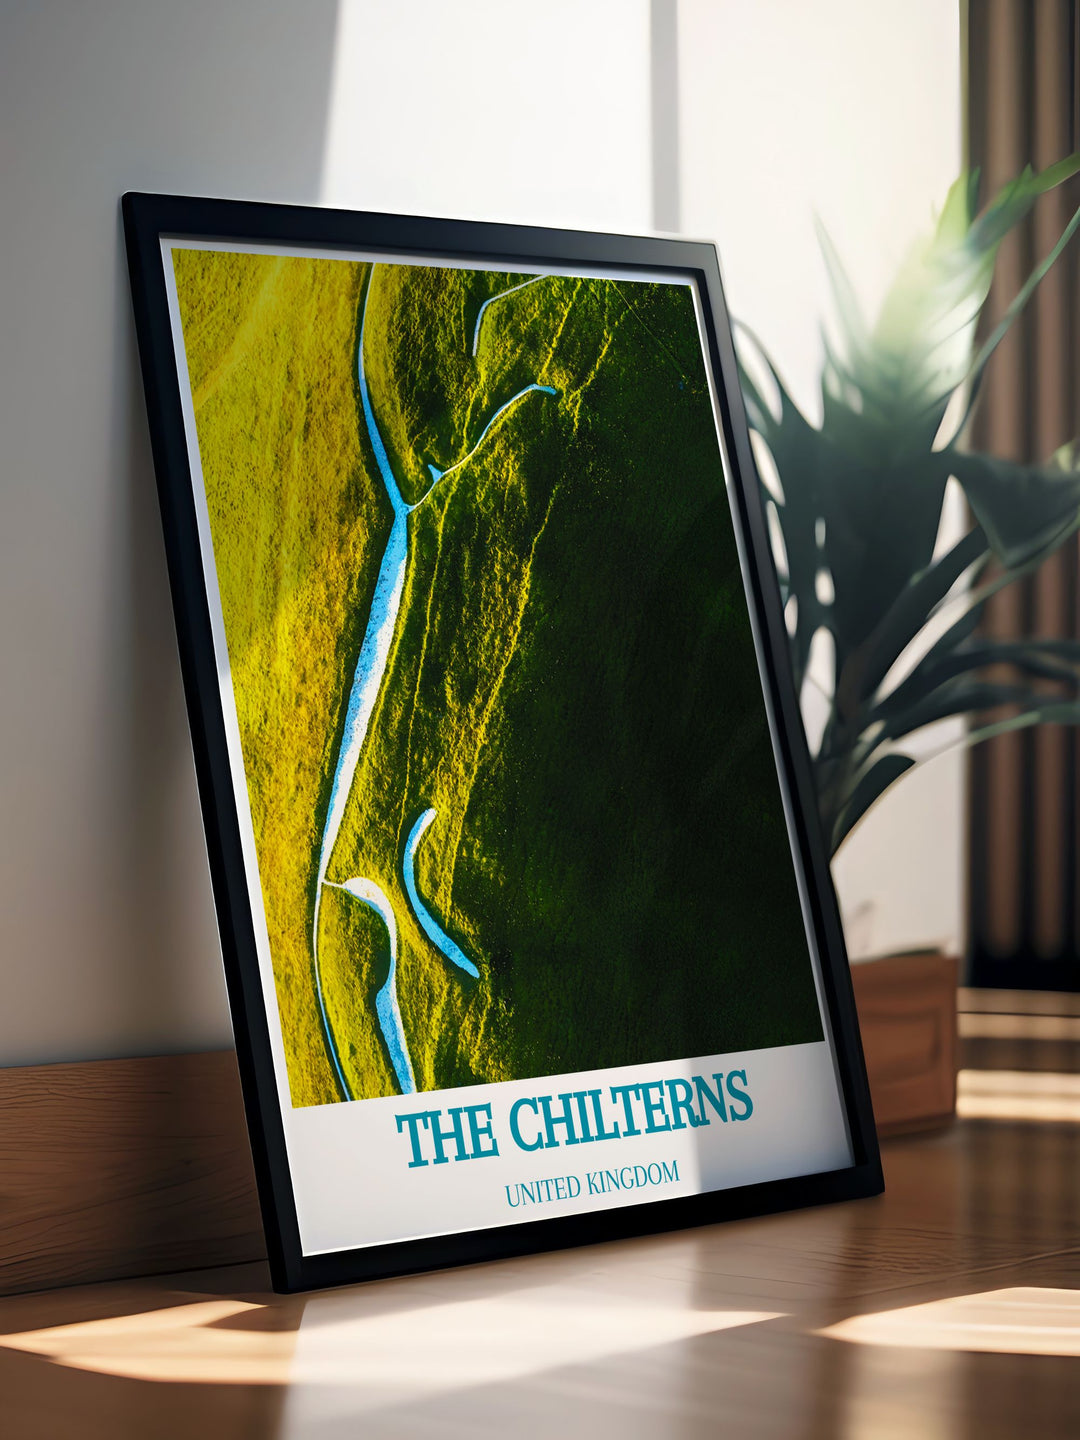 United Kingdom Vintage Posters offering a retro inspired look at The Chilterns, evoking a sense of adventure and exploration with their charming and nostalgic design.